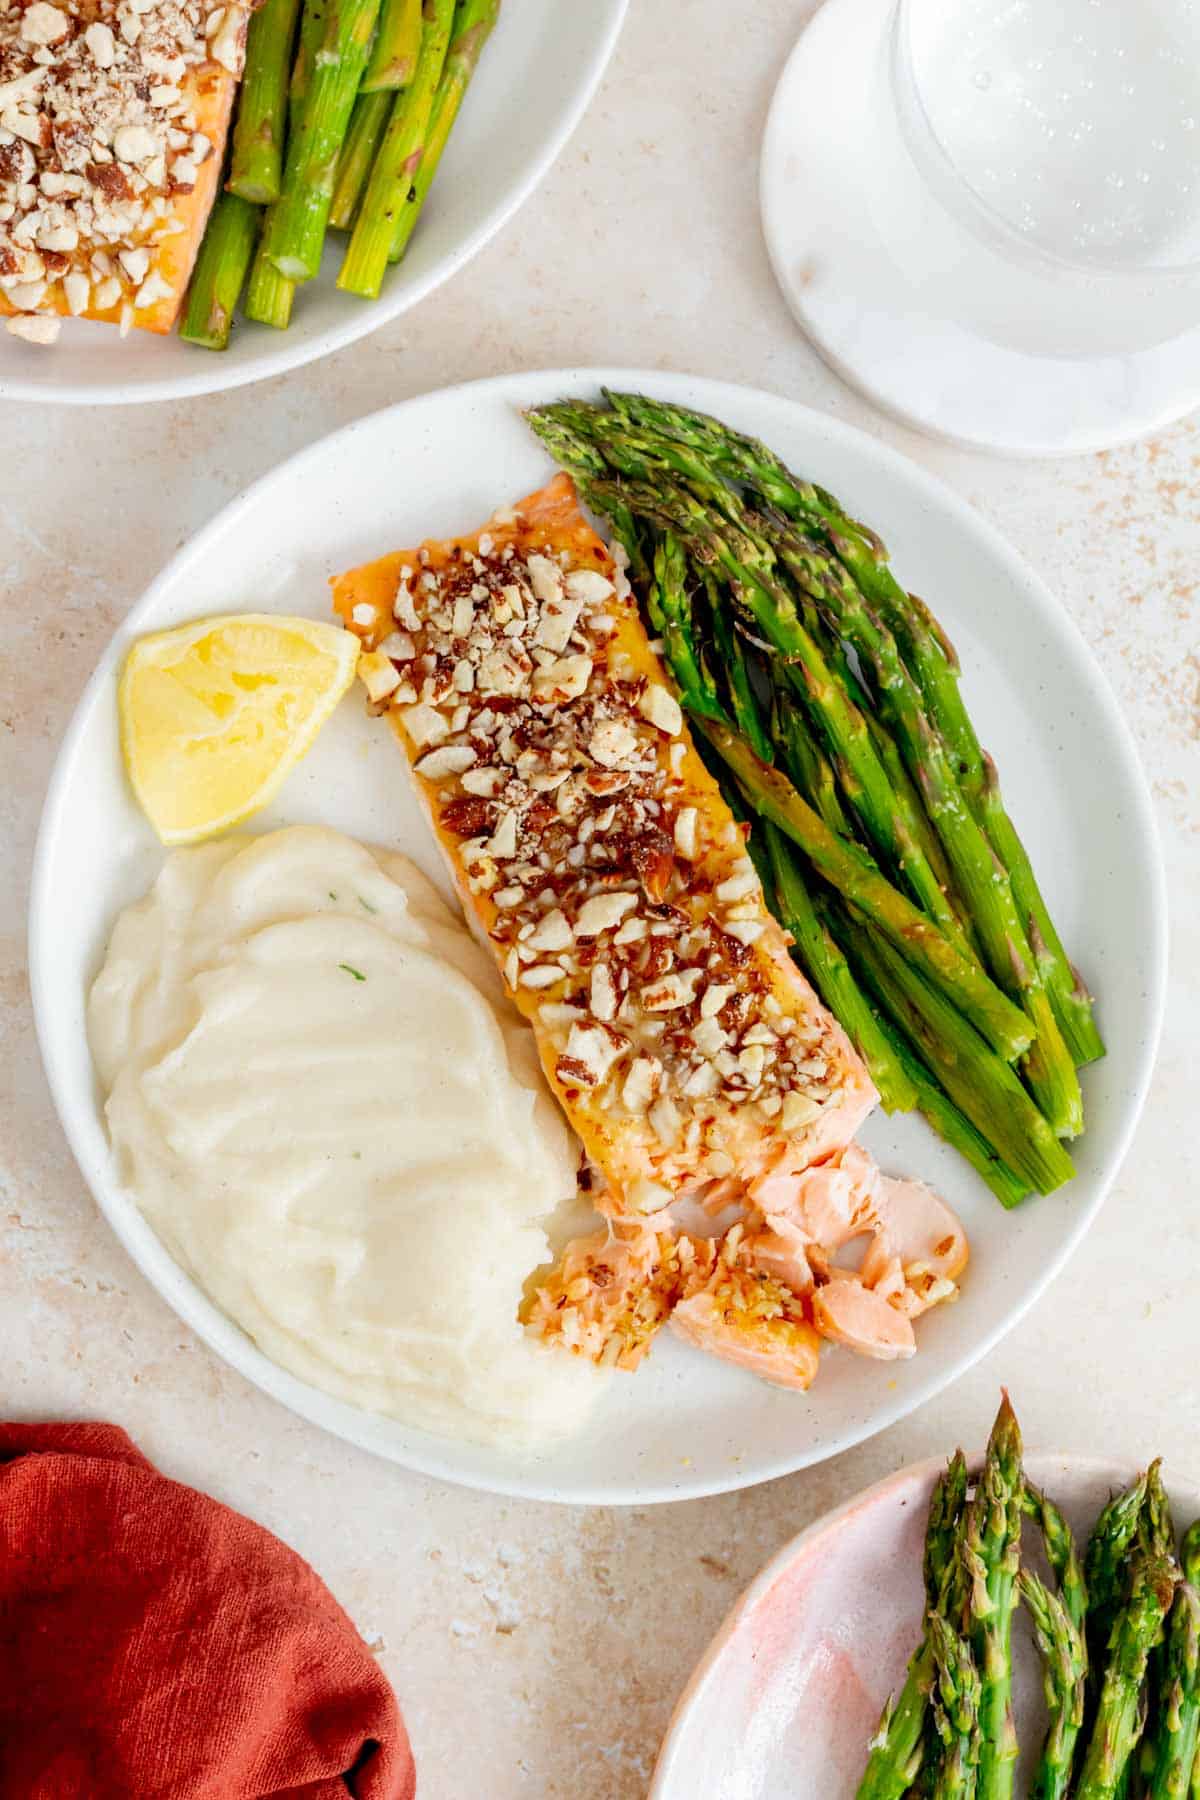 A plate with almond crusted salmon where part of it is flaked on a plate along with a lemon wedge, mashed potatoes, and asparagus.